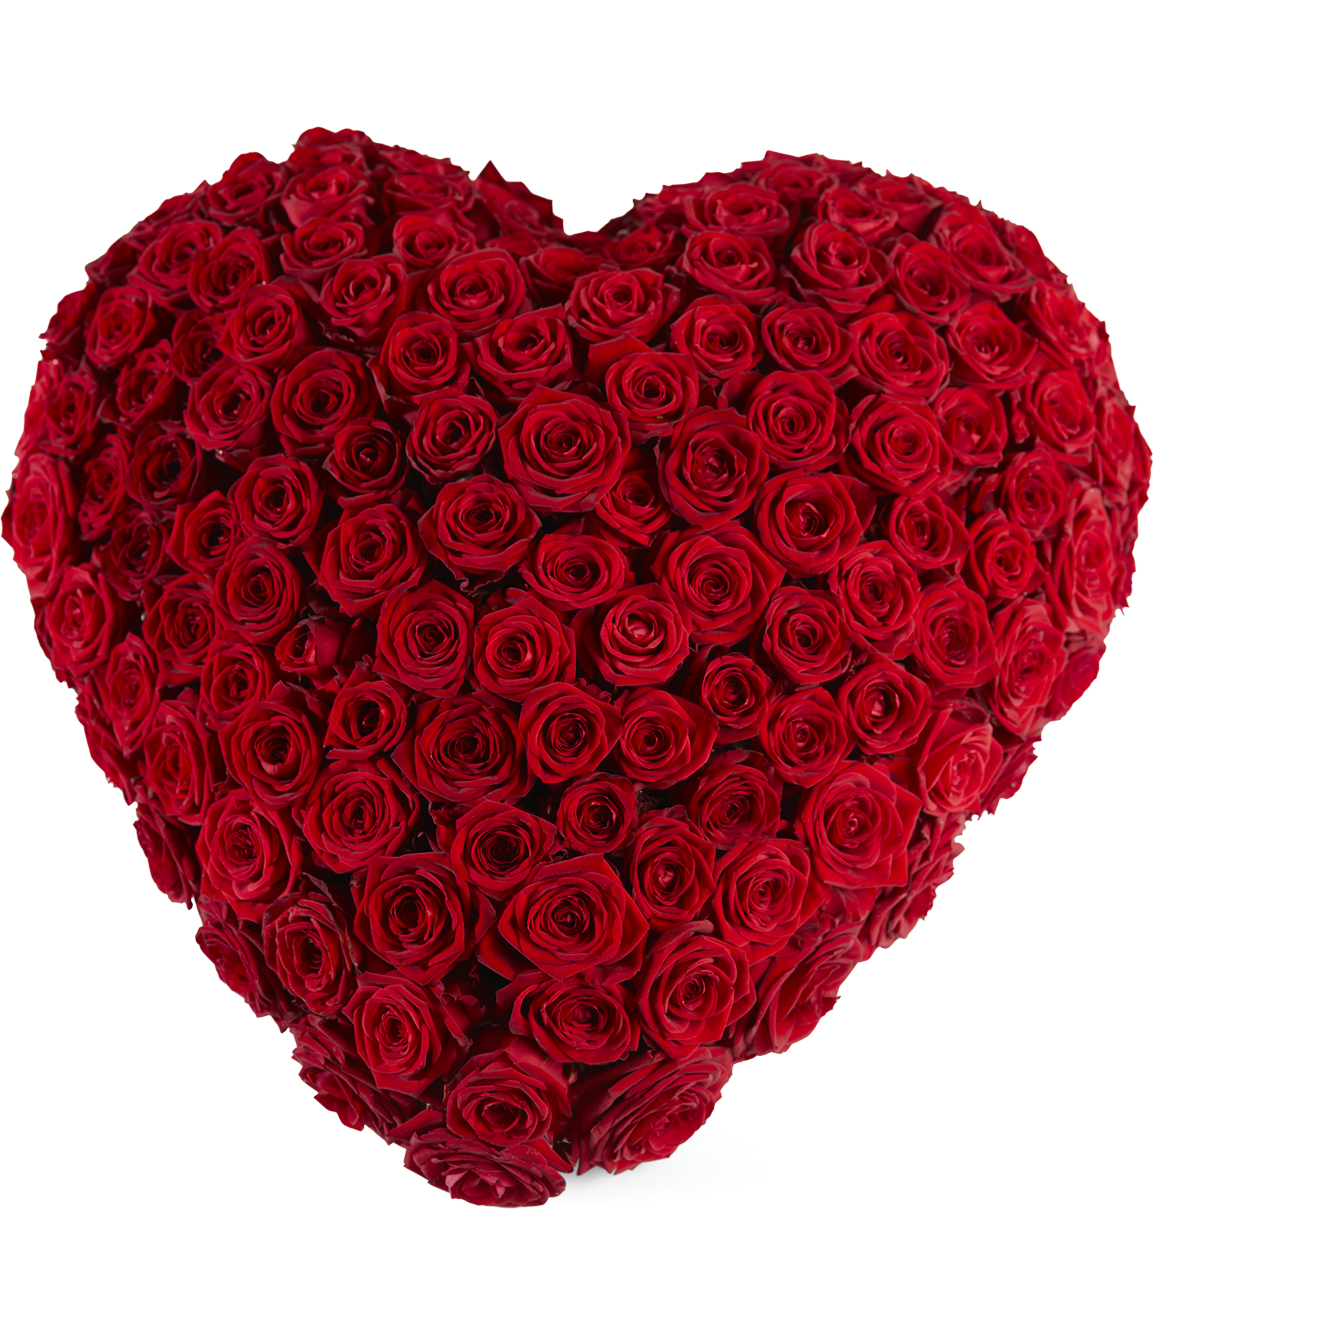 Funeral - Red roses heart - Warmly